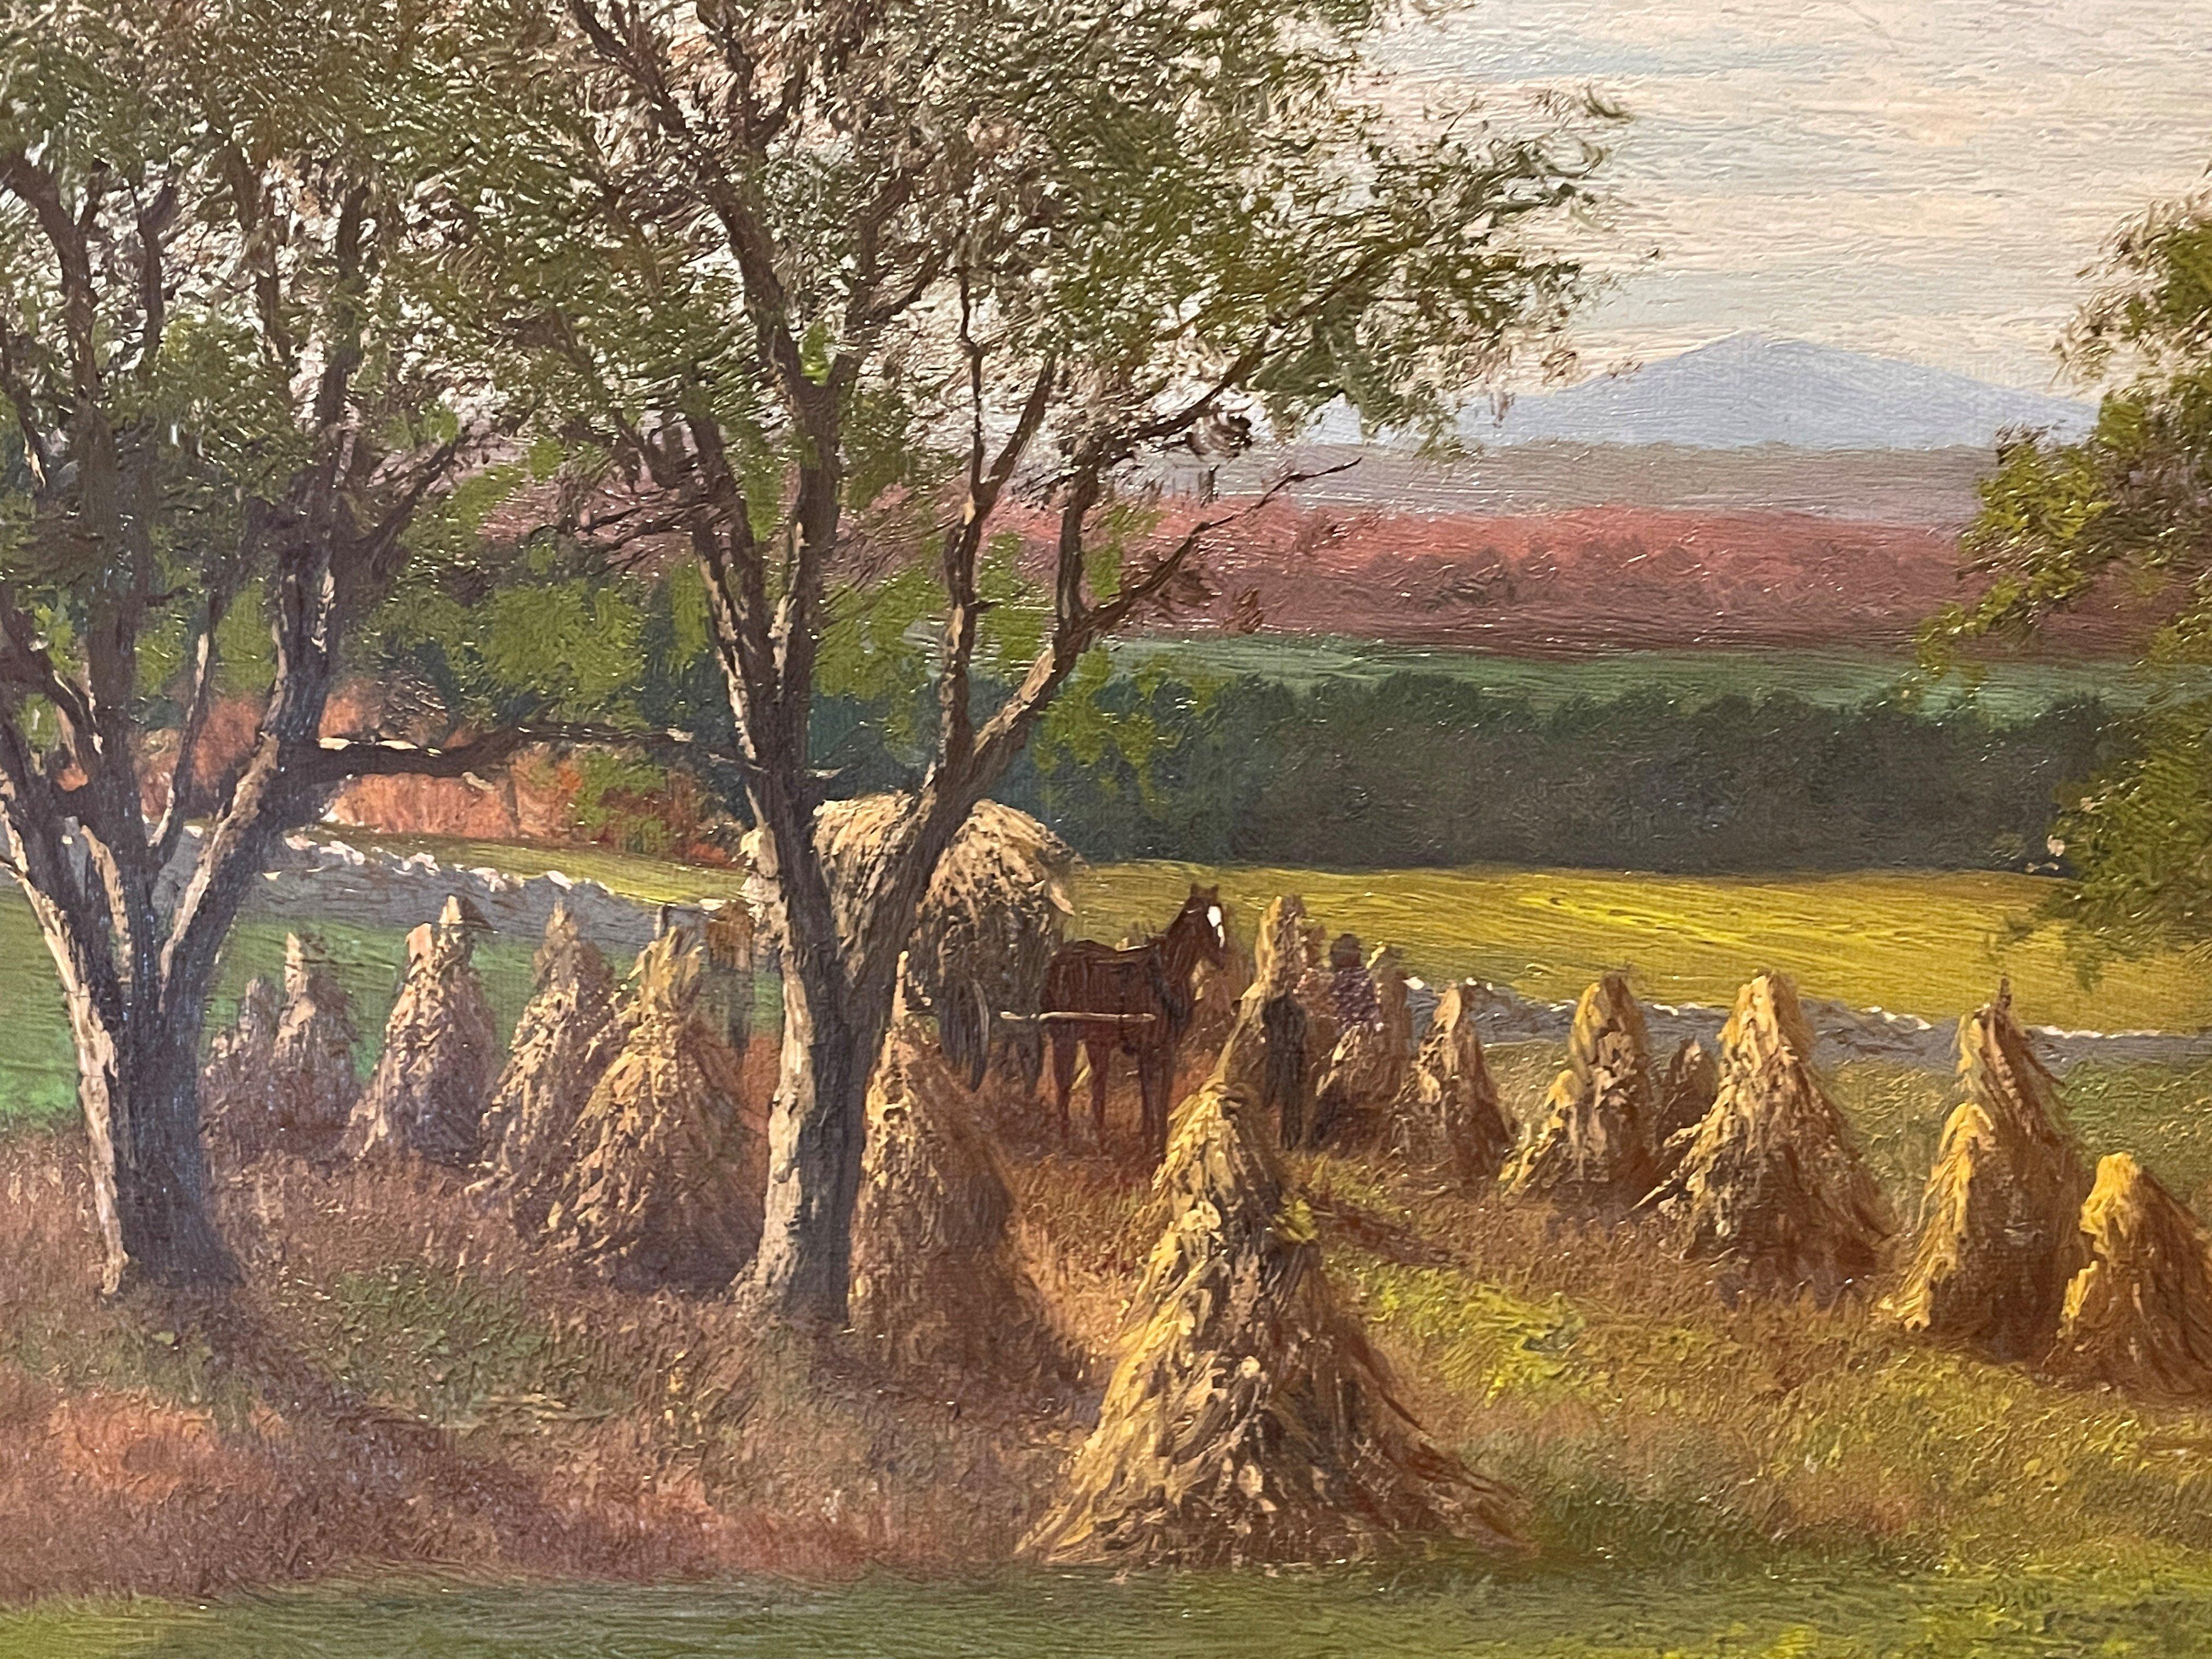 Edward Hill (1843 - 1923)
Haying at a North Conway Farm with Mount Washington in the Distance, New Hampshire
Oil on canvas
13 1/2 x 20 1/2 inches
Signed lower right

Provenance:
Private Collection, Dallas, Texas

Born in Wolverhampton, England in